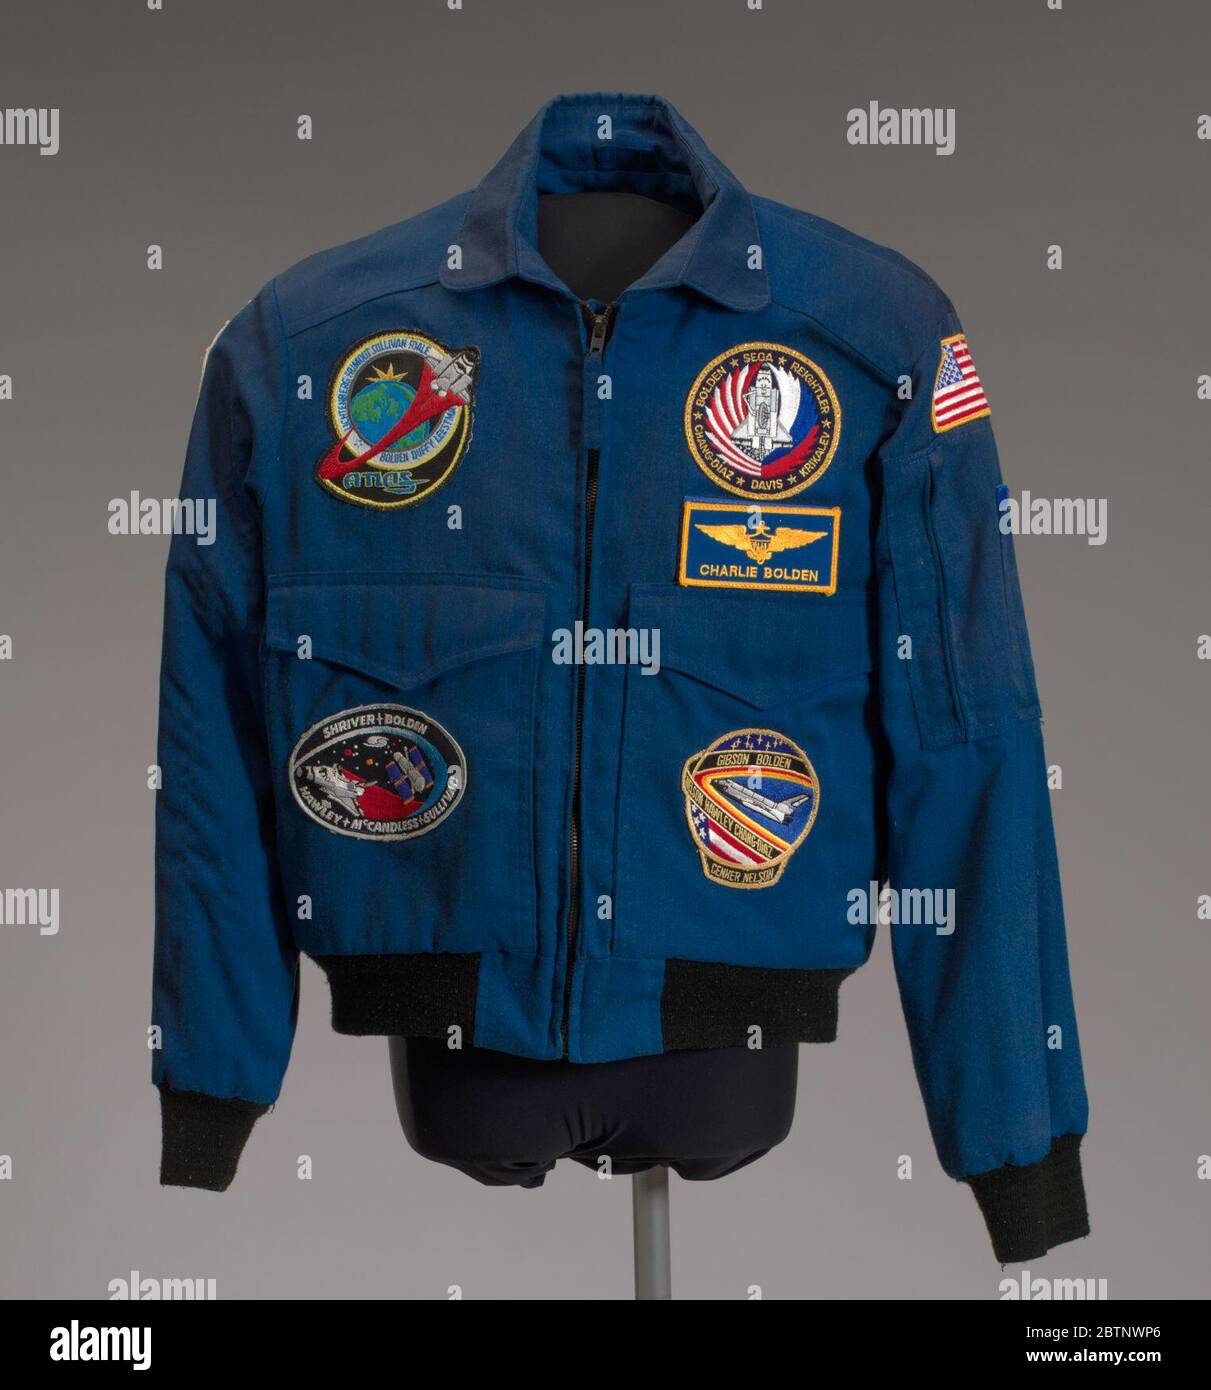 NASA flight jacket owned by Charles Bolden. Blue flight jacket featuring seven different patches. An American flag patch appears on the proper left shoulder of the flight jacket. A patch on the proper right shoulder depicts a space shuttle ascending vertically above stars set against a red, orange, and yellow background. Stock Photo